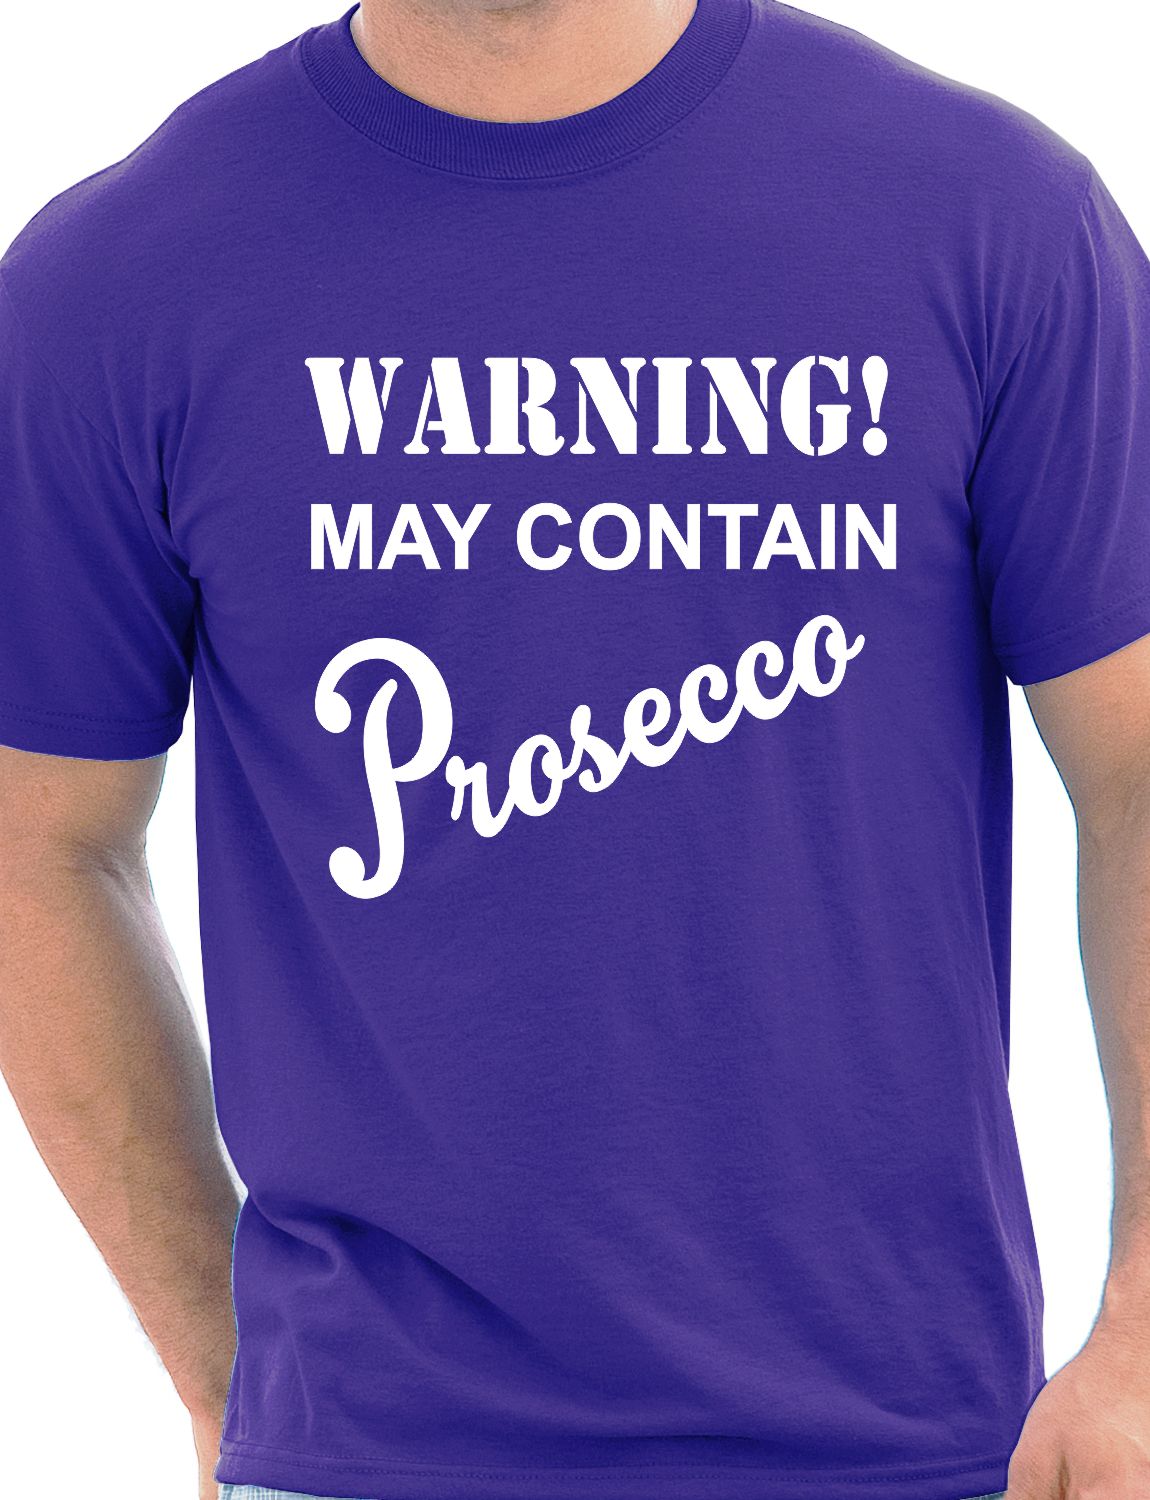 Warning Contains Prosecco Funny Drinks Gift Mens T-Shirt Size S-XXL